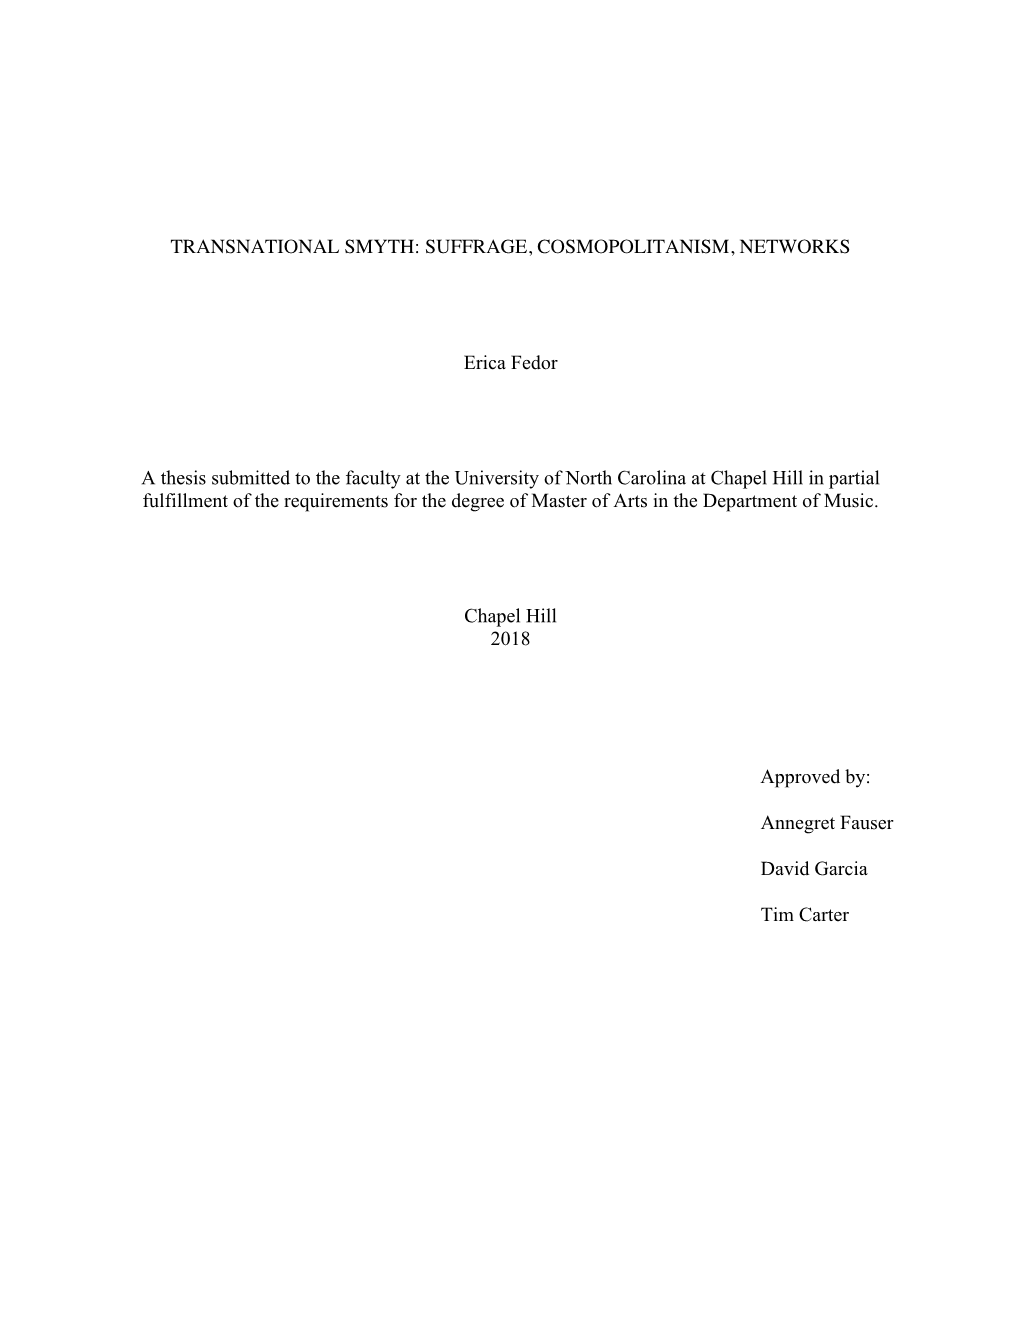 TRANSNATIONAL SMYTH: SUFFRAGE, COSMOPOLITANISM, NETWORKS Erica Fedor a Thesis Submitted to the Faculty at the University Of